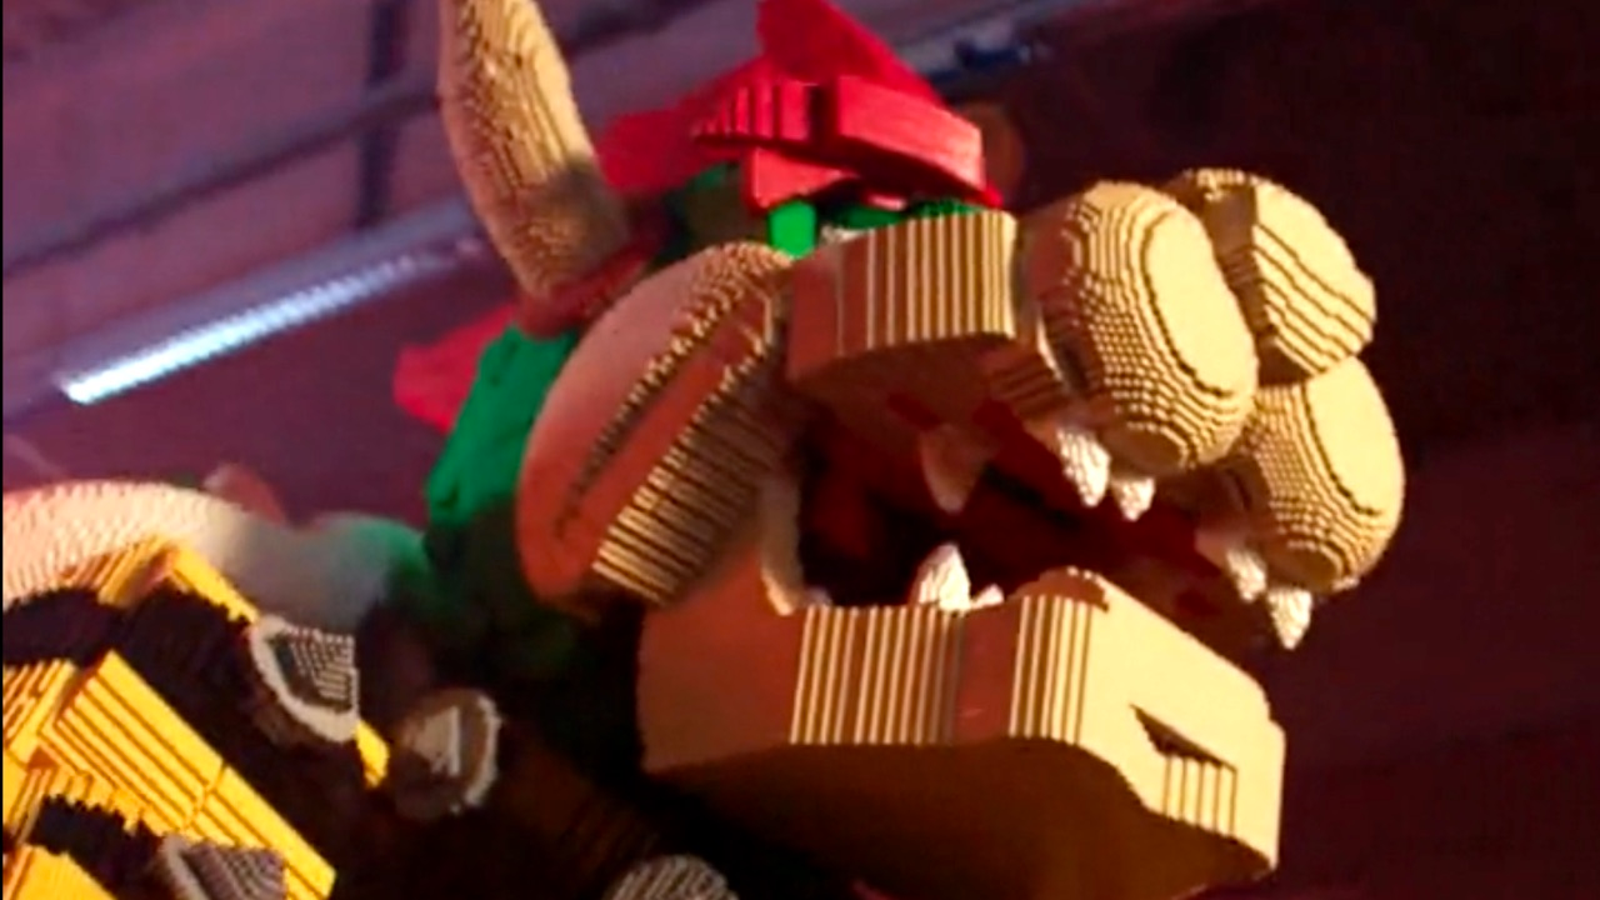 This HUGE Lego Bowser is NUTS (And cost $300 😭) 